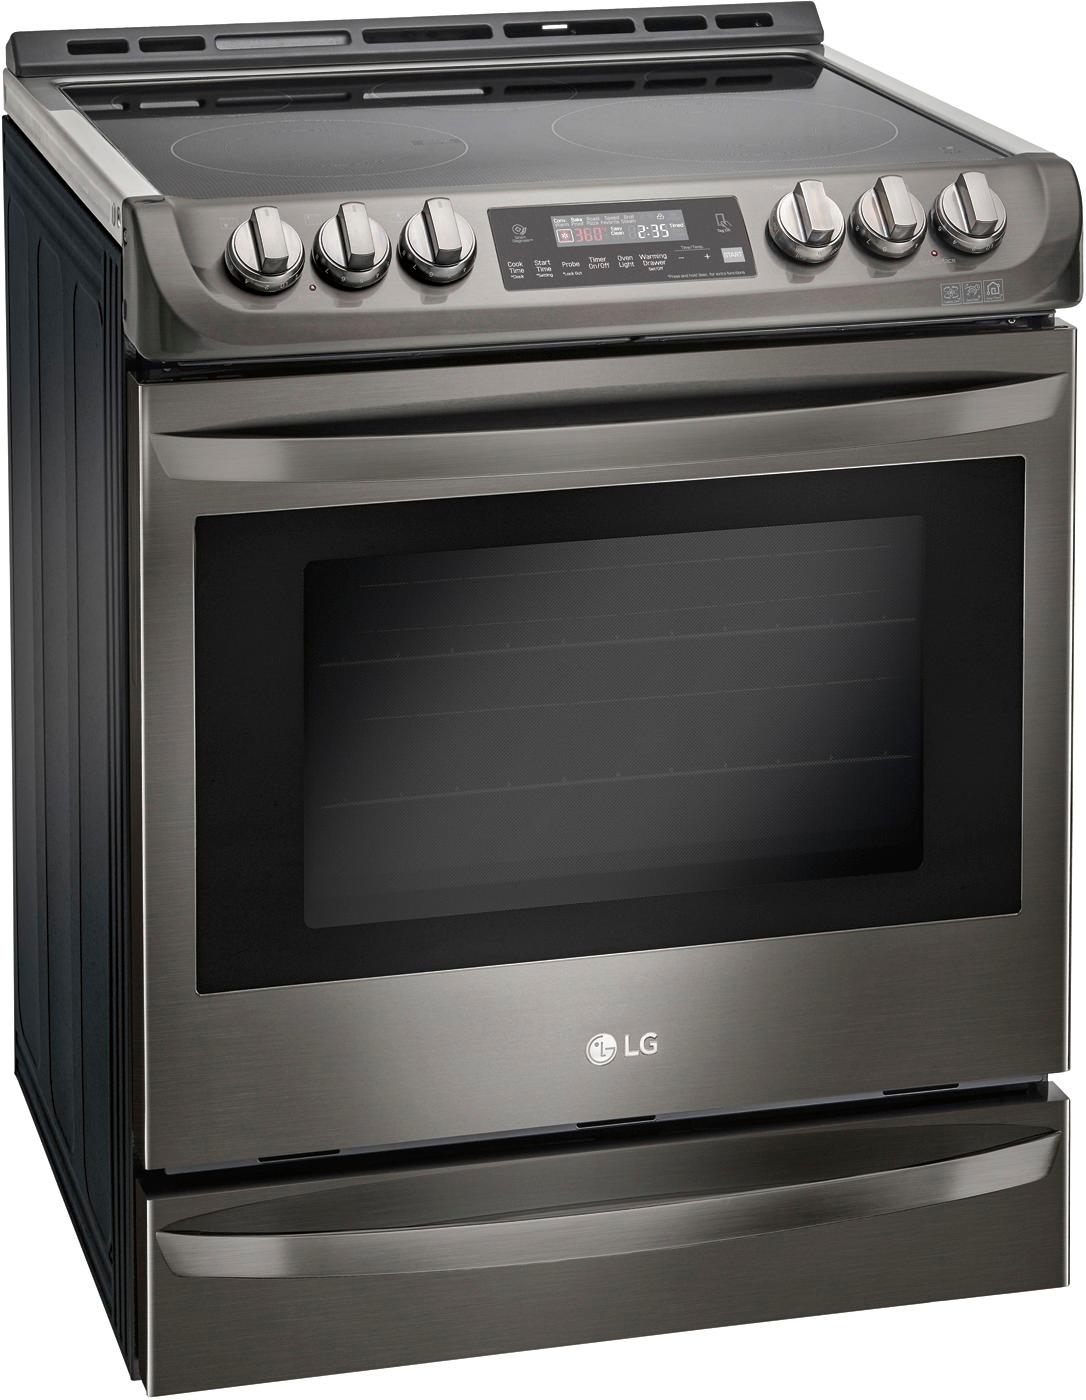 Angle View: LG - 6.3 Cu. Ft. Self-Cleaning Slide-In Electric Range with ProBake Convection - Black stainless steel